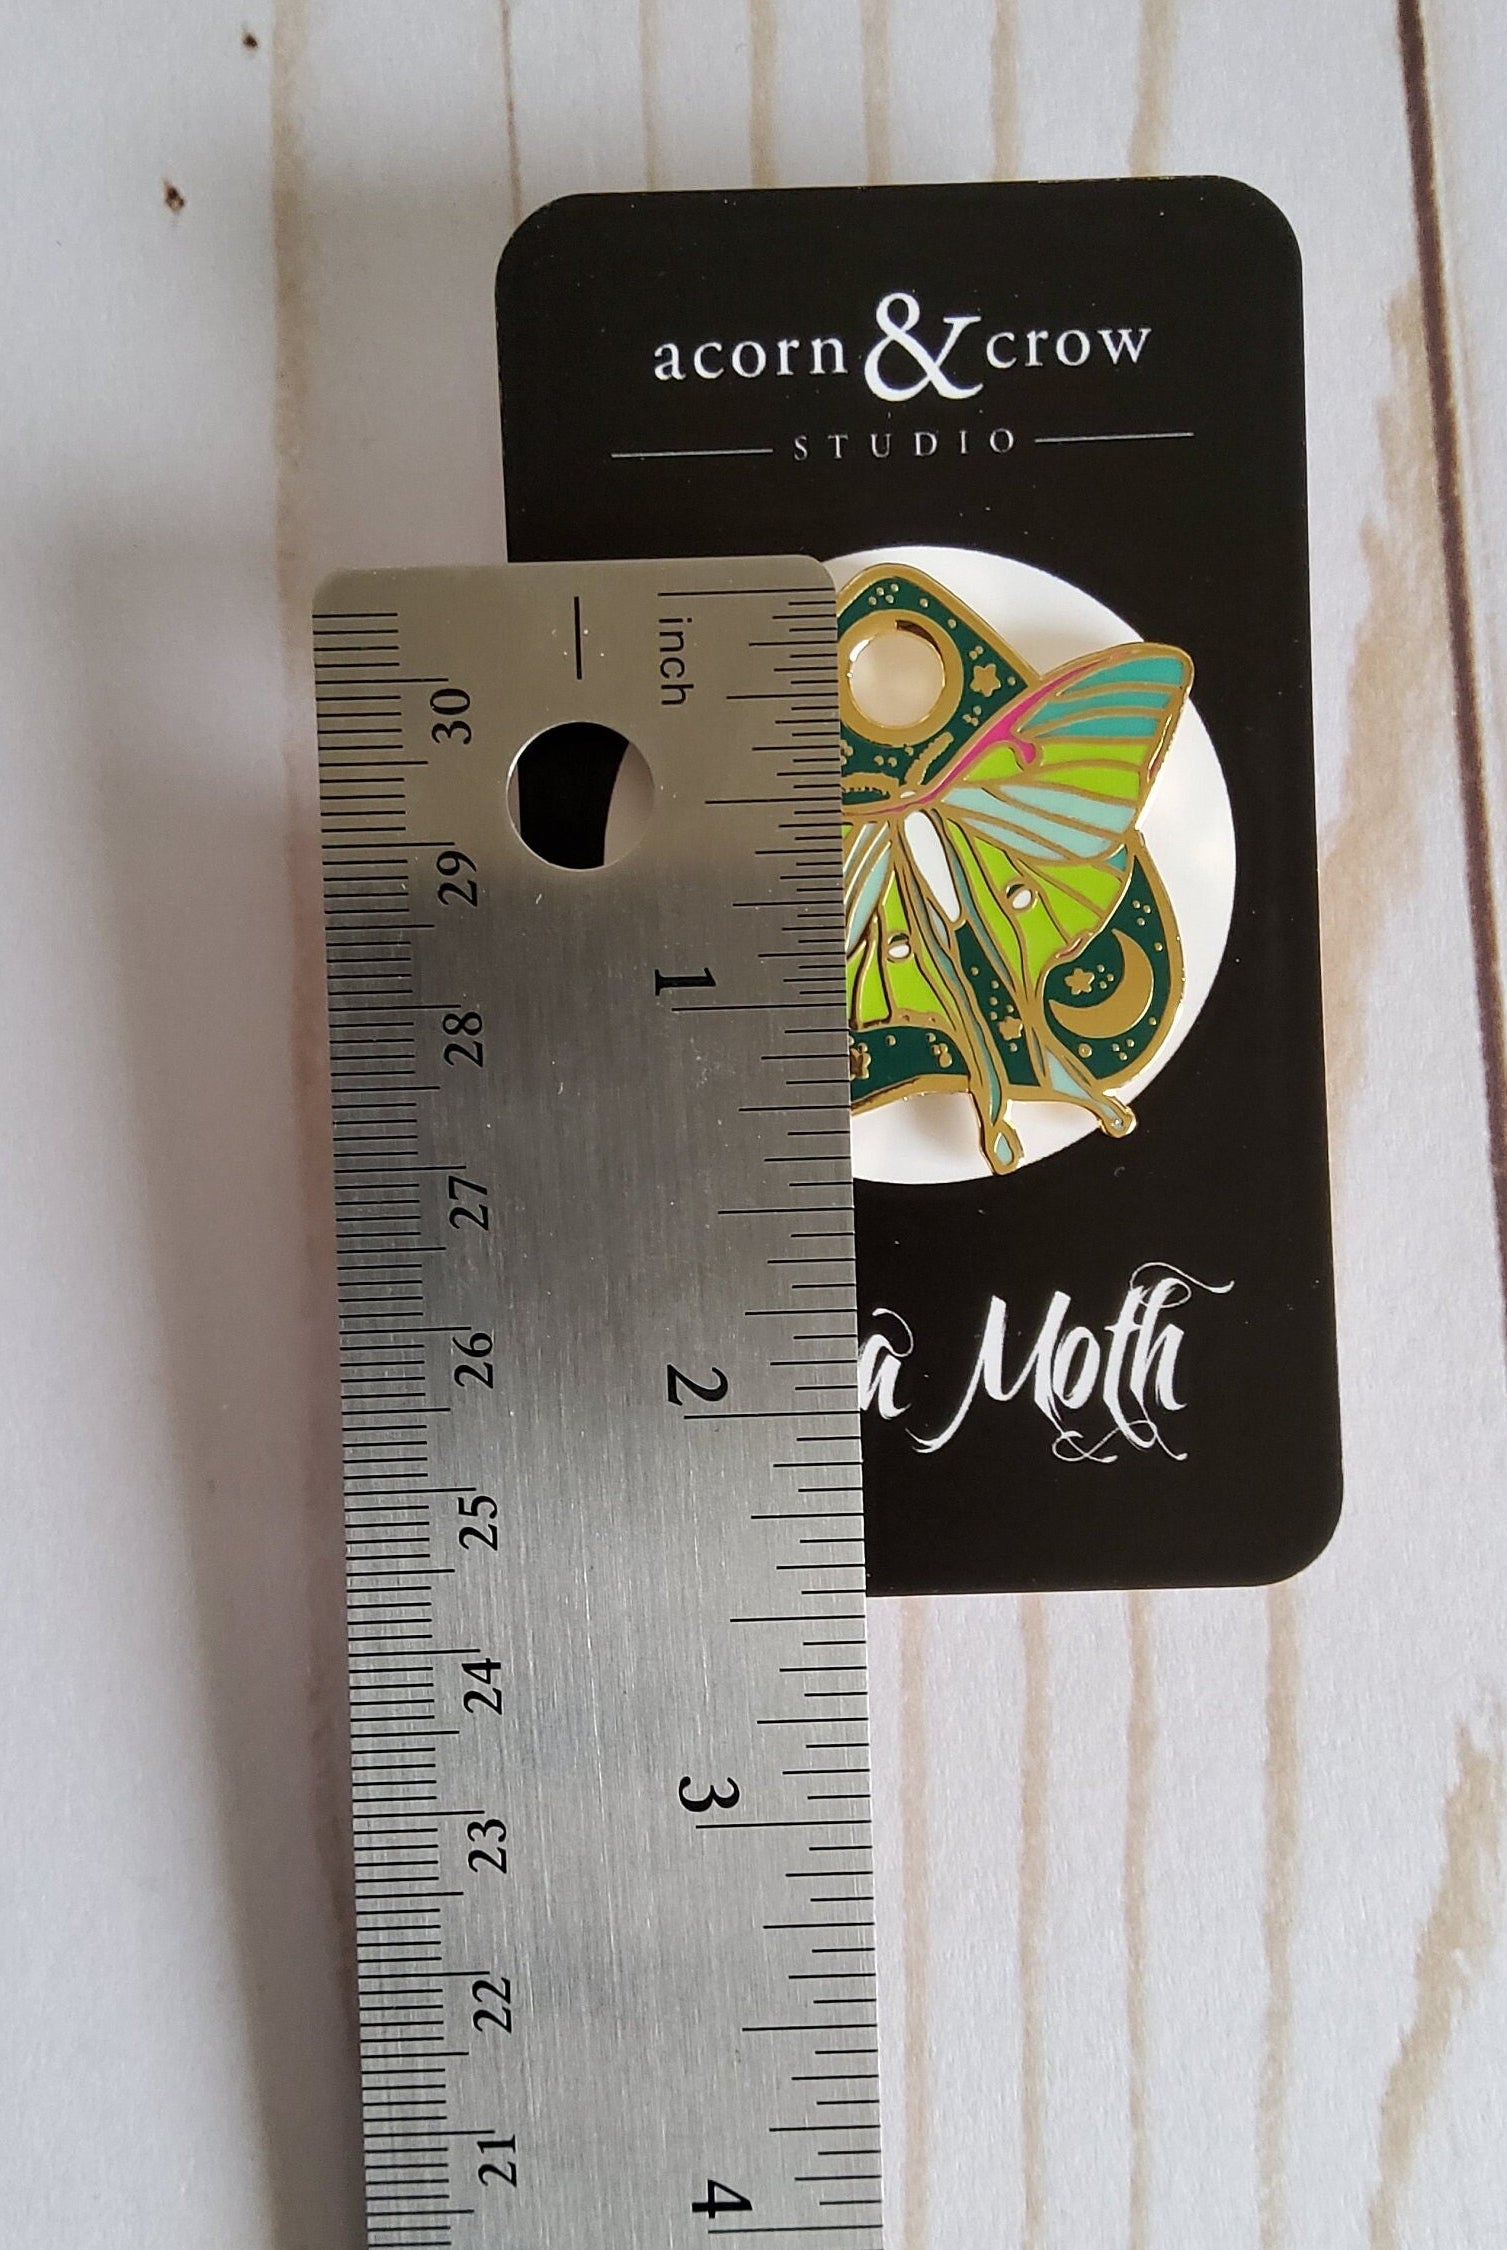 ENAMEL PIN: Luna Moth and Forest Green Planchette , Luna Moth and Planchette Enamel Pin , Luna Moth Enamel Pin , Planchette Enamel Pin